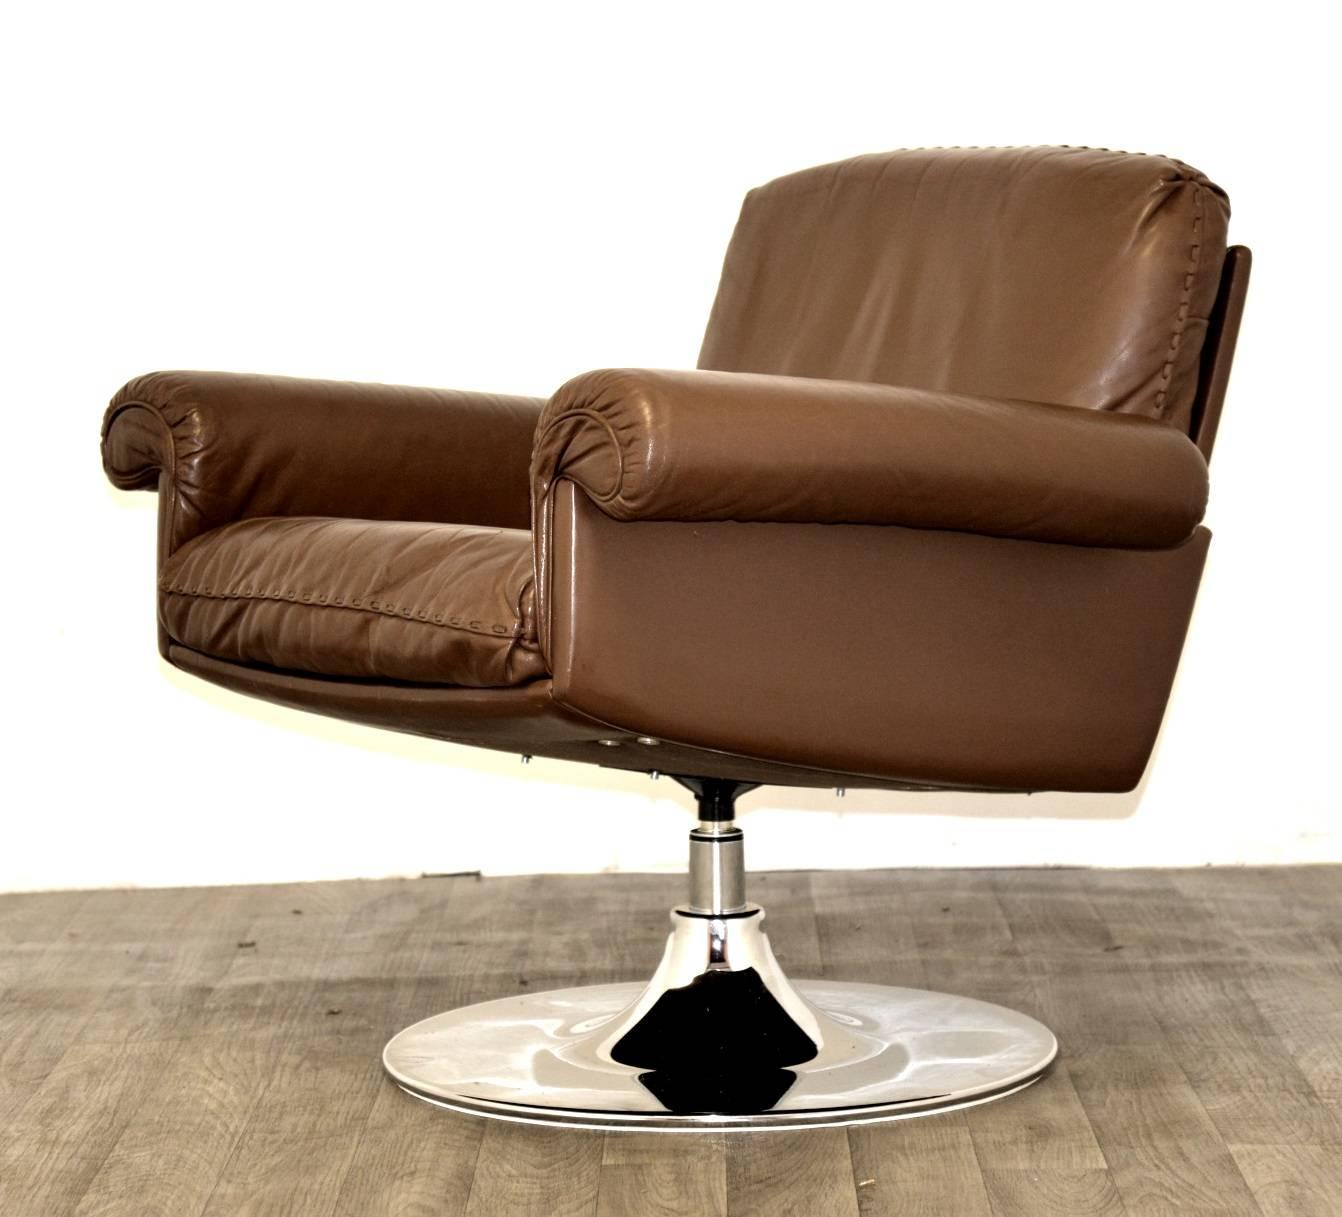 Discounted airfreight for our US and International customers ( from 2 weeks door to door)

The Cambridge Chair Company brings to you a vintage 1970s De Sede DS 31 lounge armchair in soft brown aniline leather with superb whipstitch edge detail. This